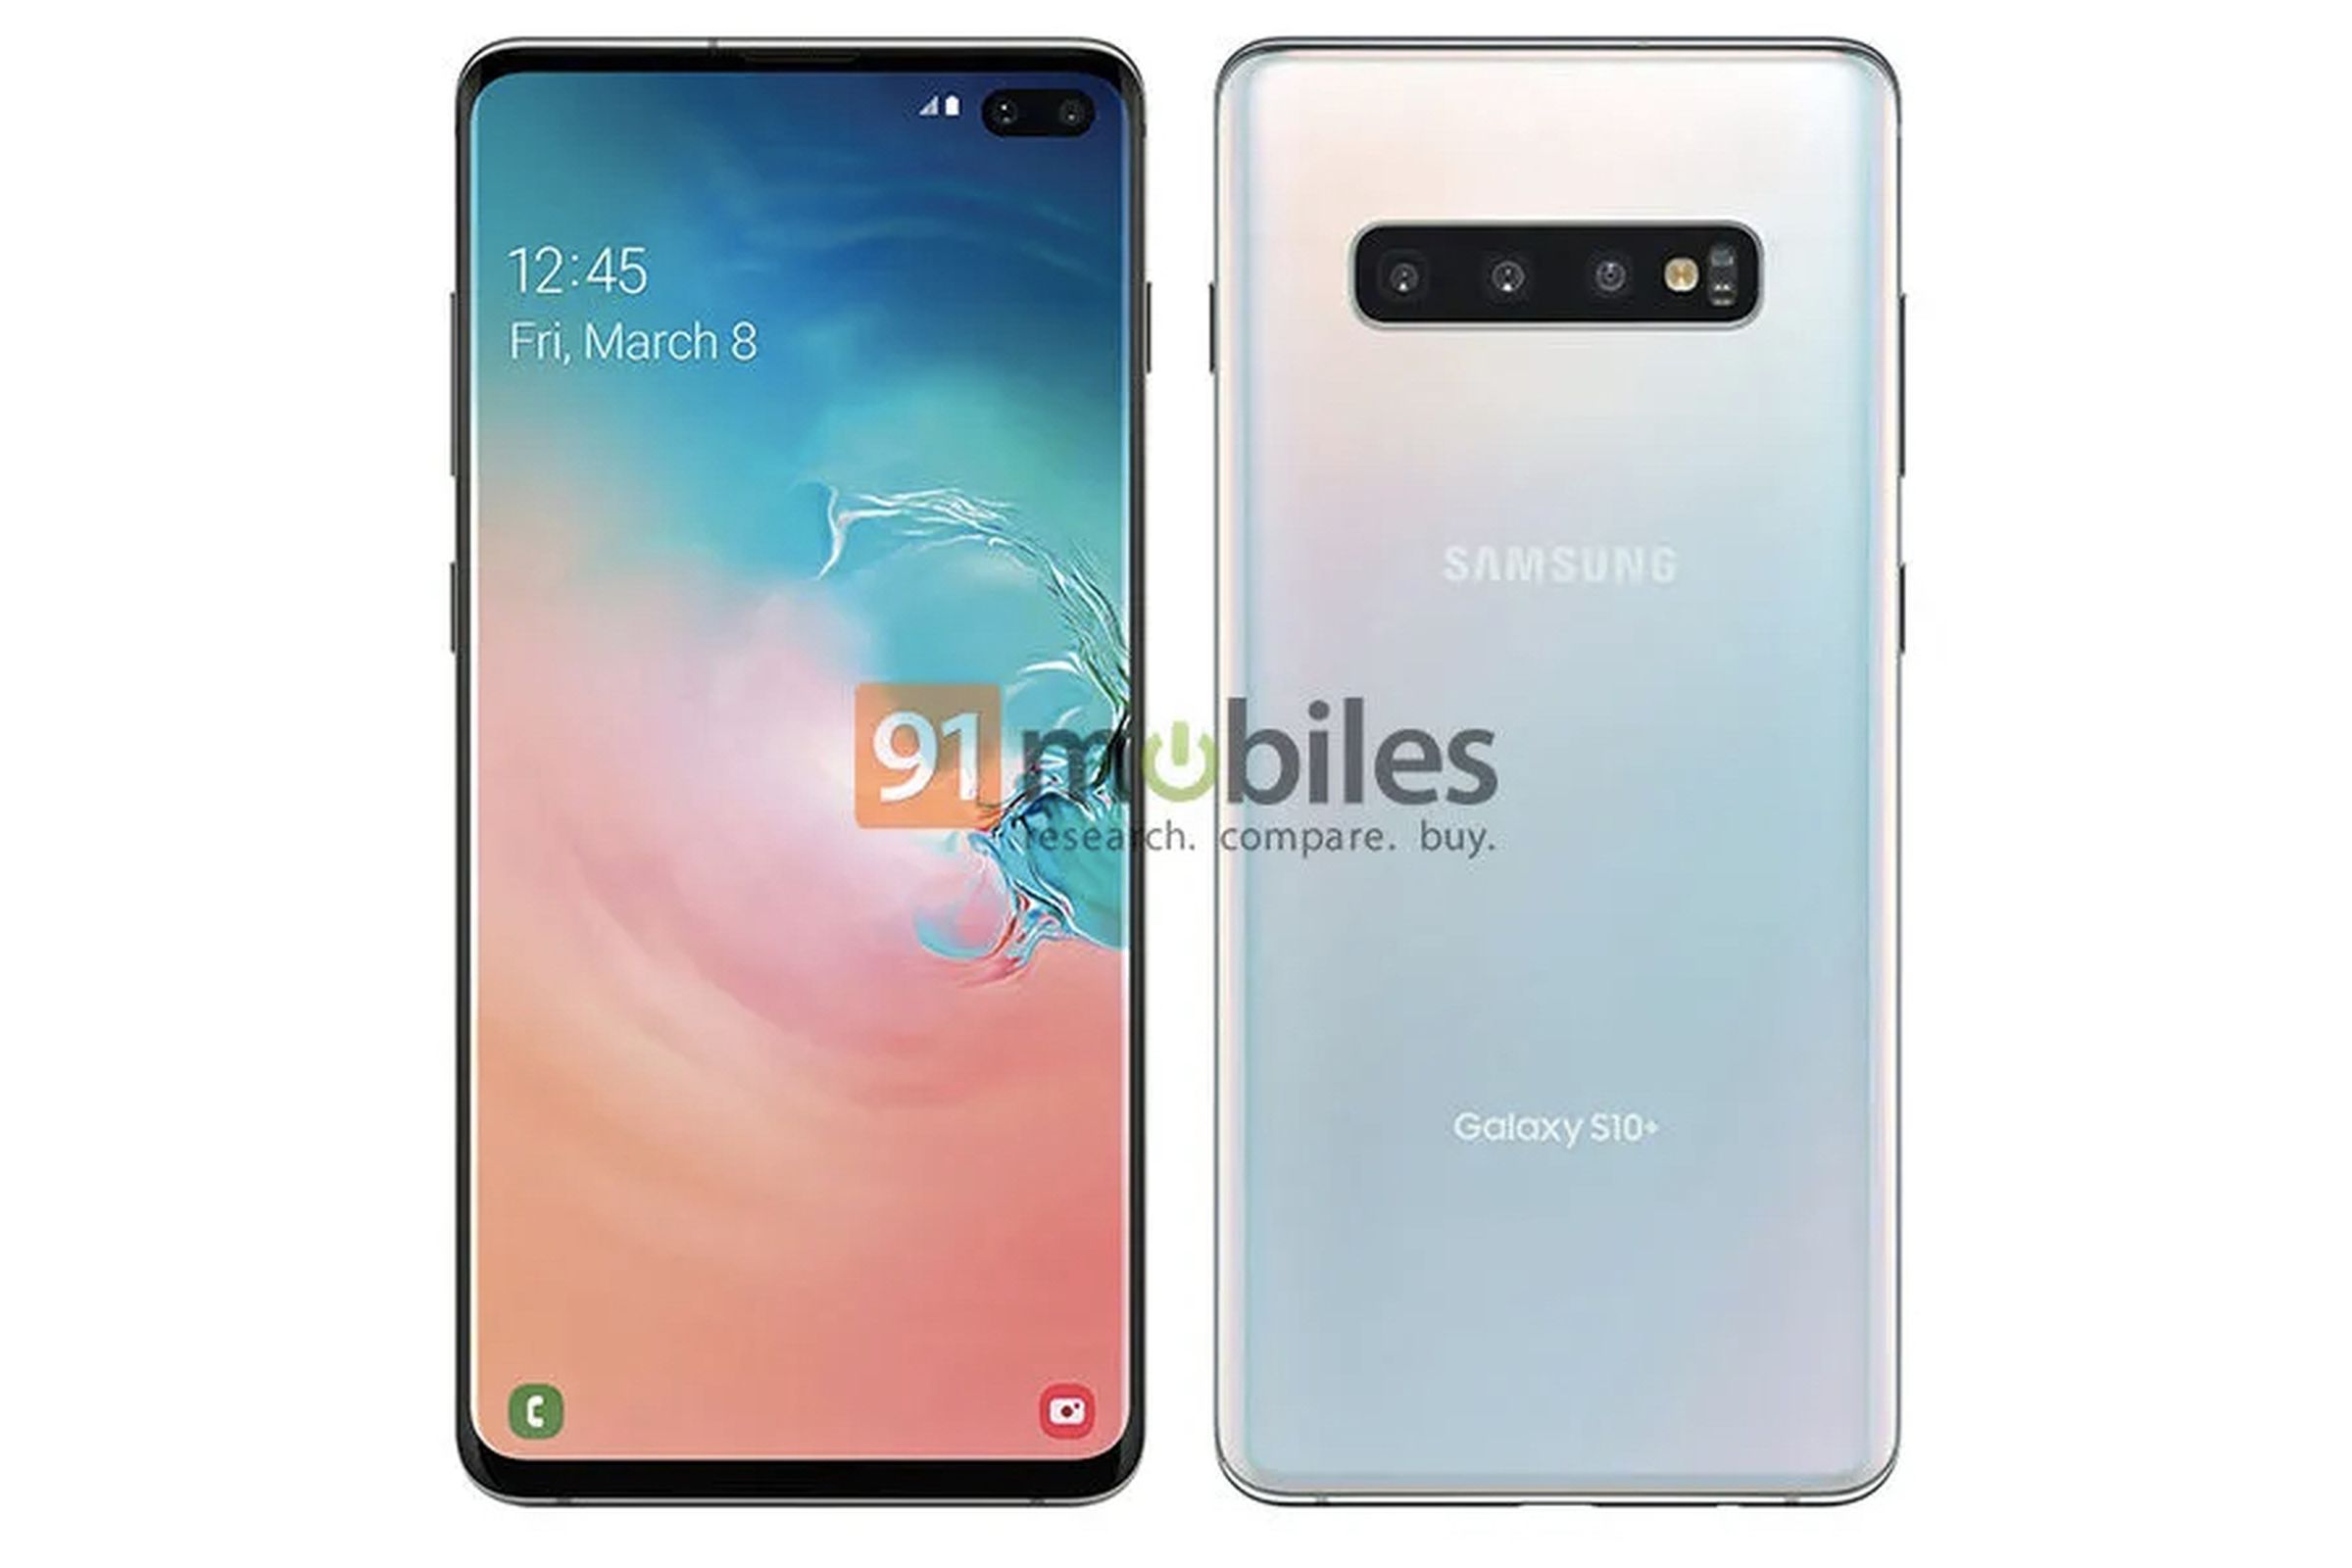 The Samsung Galaxy S10 Plus front and rear in what is reportedly an official render.